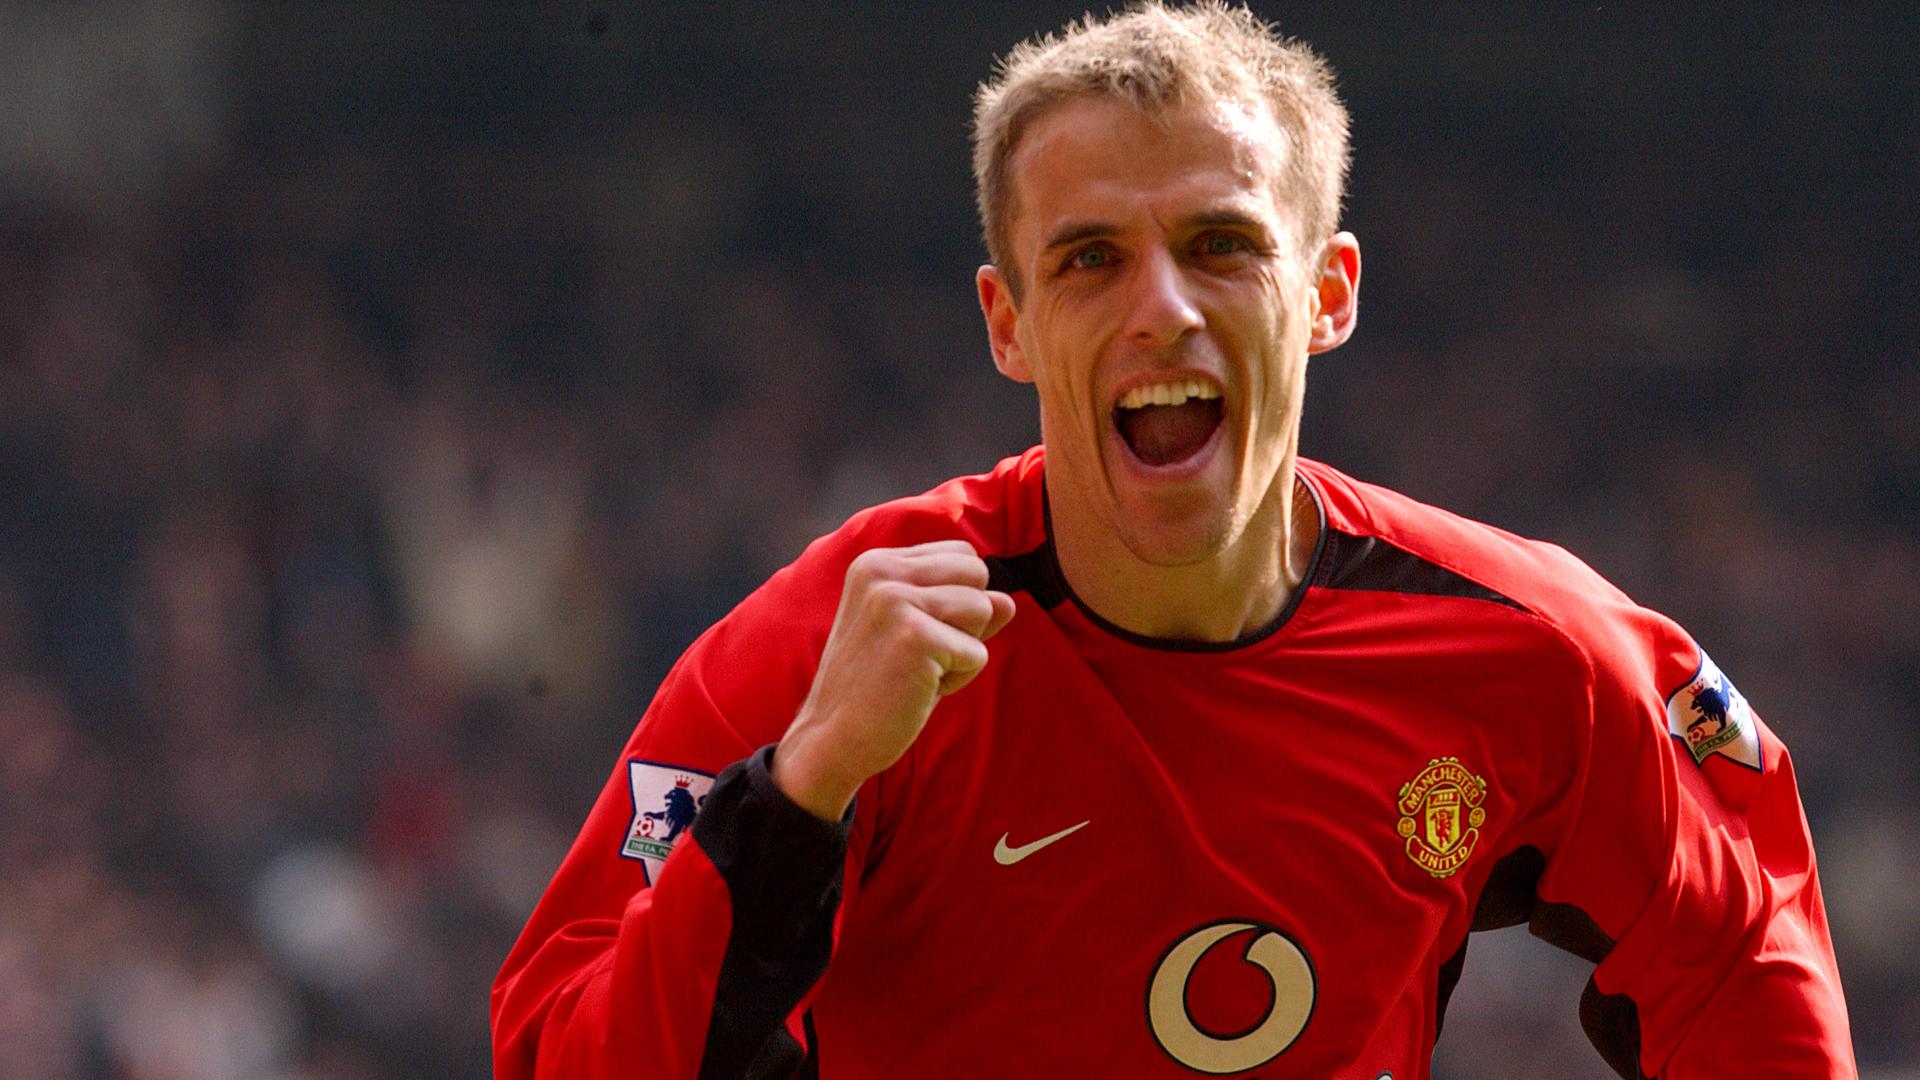 Exclusive lockdown interview with Man Utd great Phil Neville